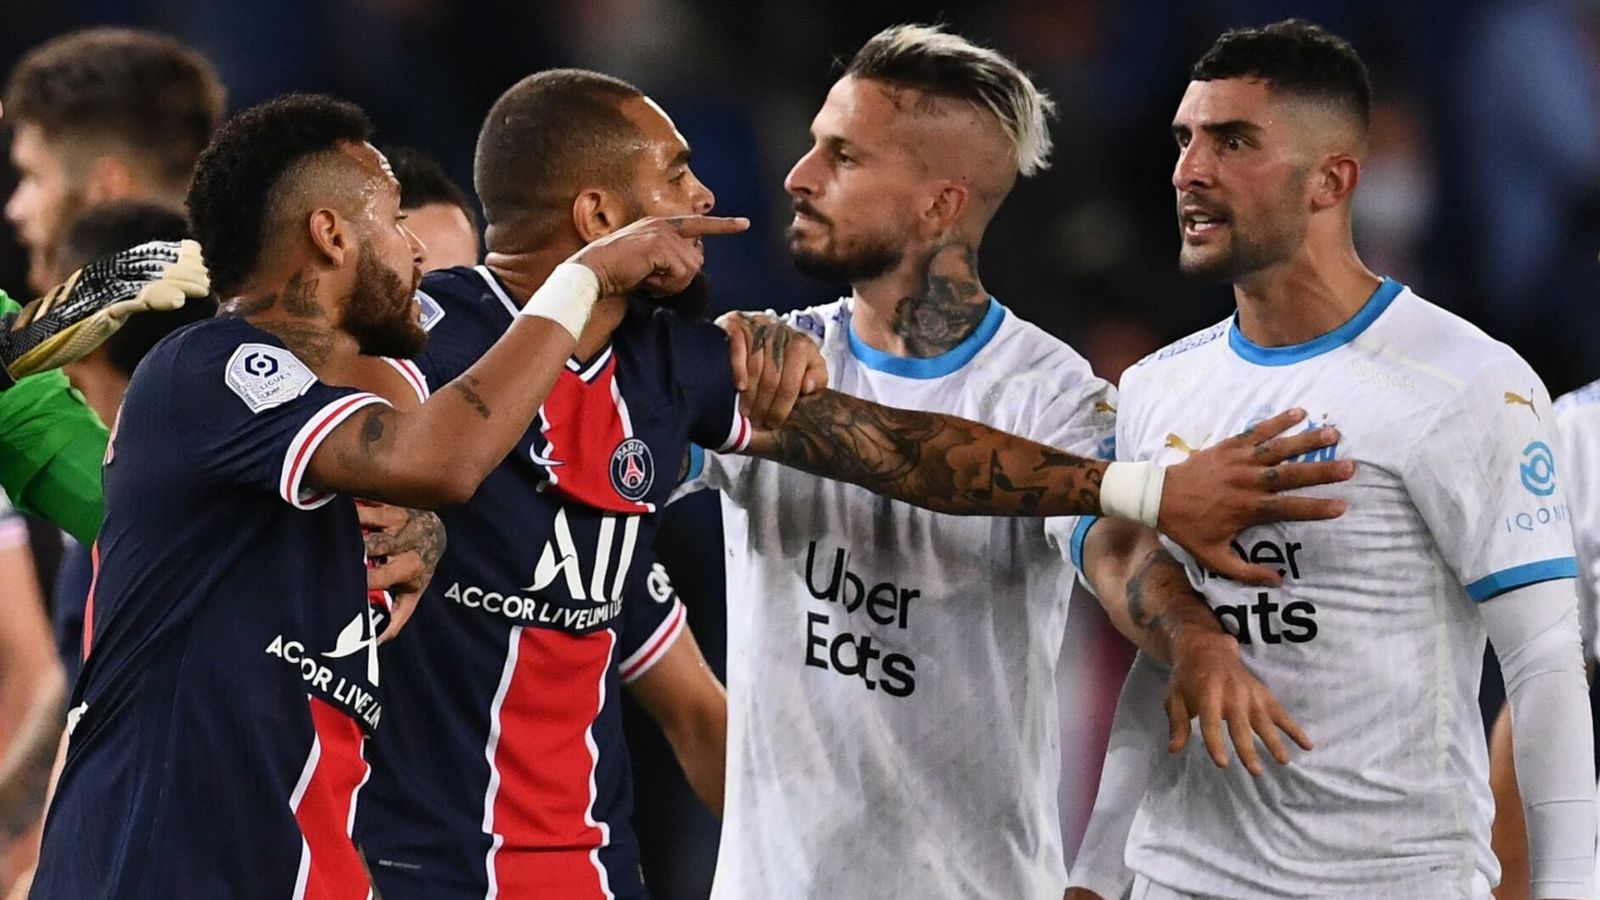 PSG 0-1 Marseille: Neymar makes racism claim as Marseille win in Le Classique ends with five red cards - Football News - Sky Sports